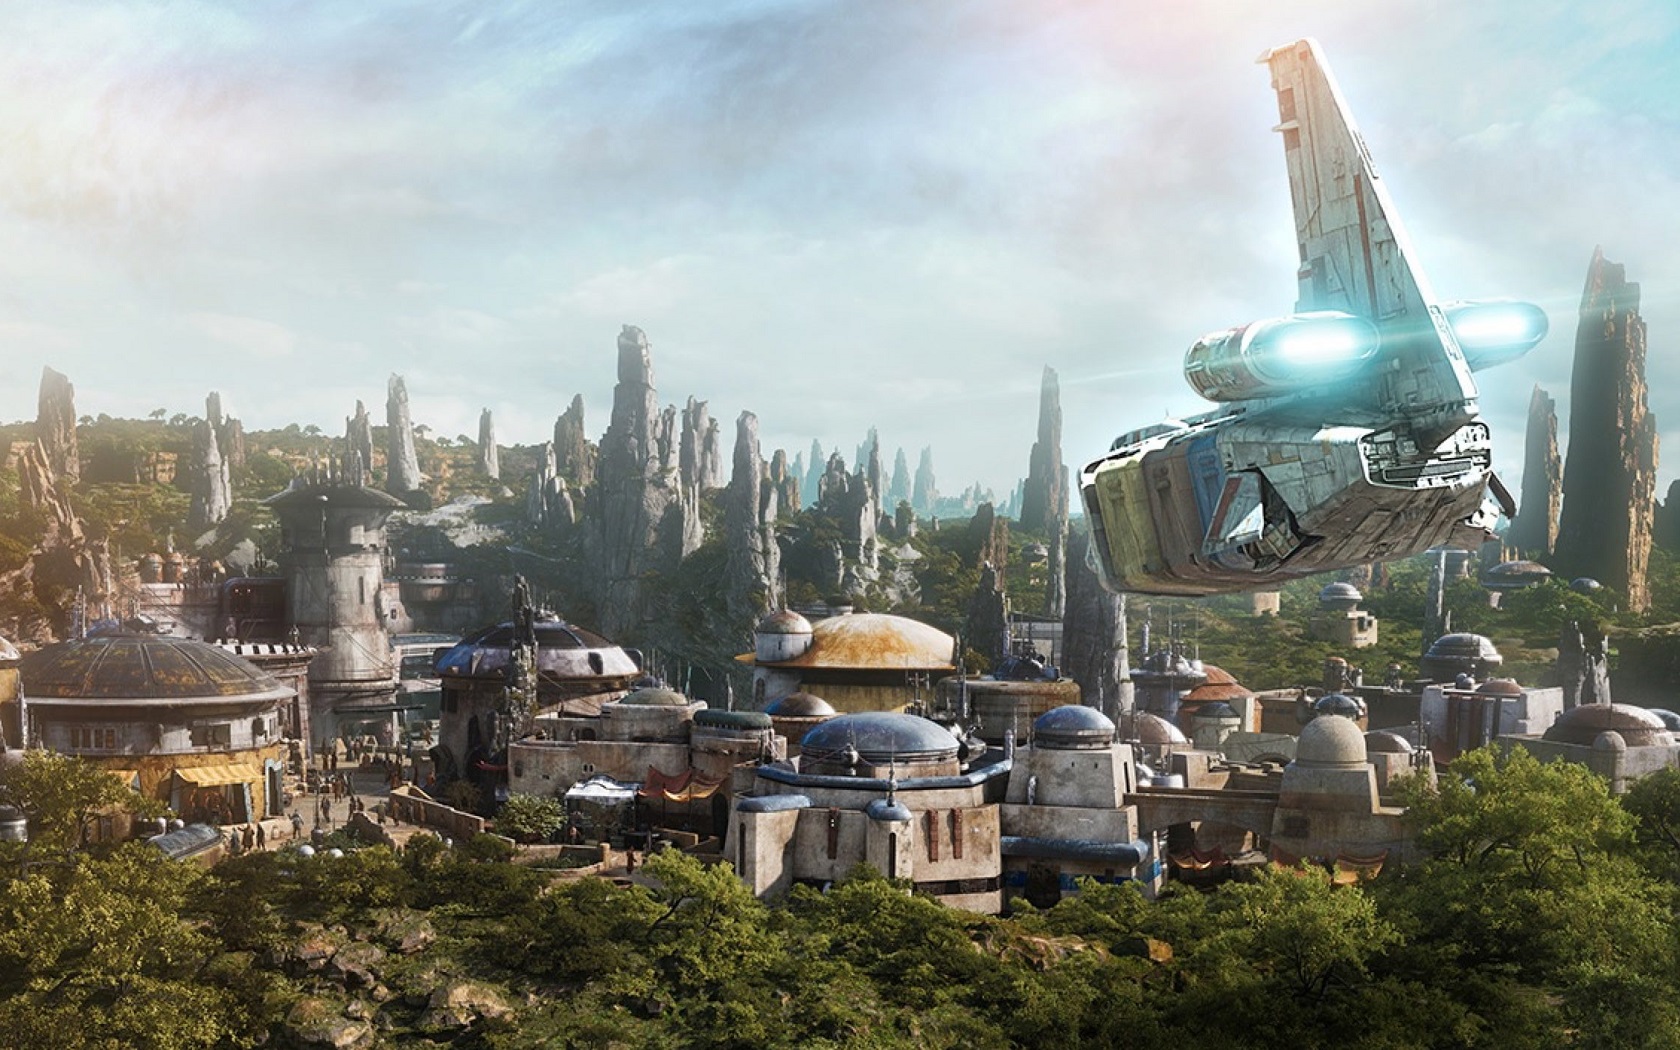 Galaxy's Edge, AKA Star Wars land, is an exciting new addition to Disneyland